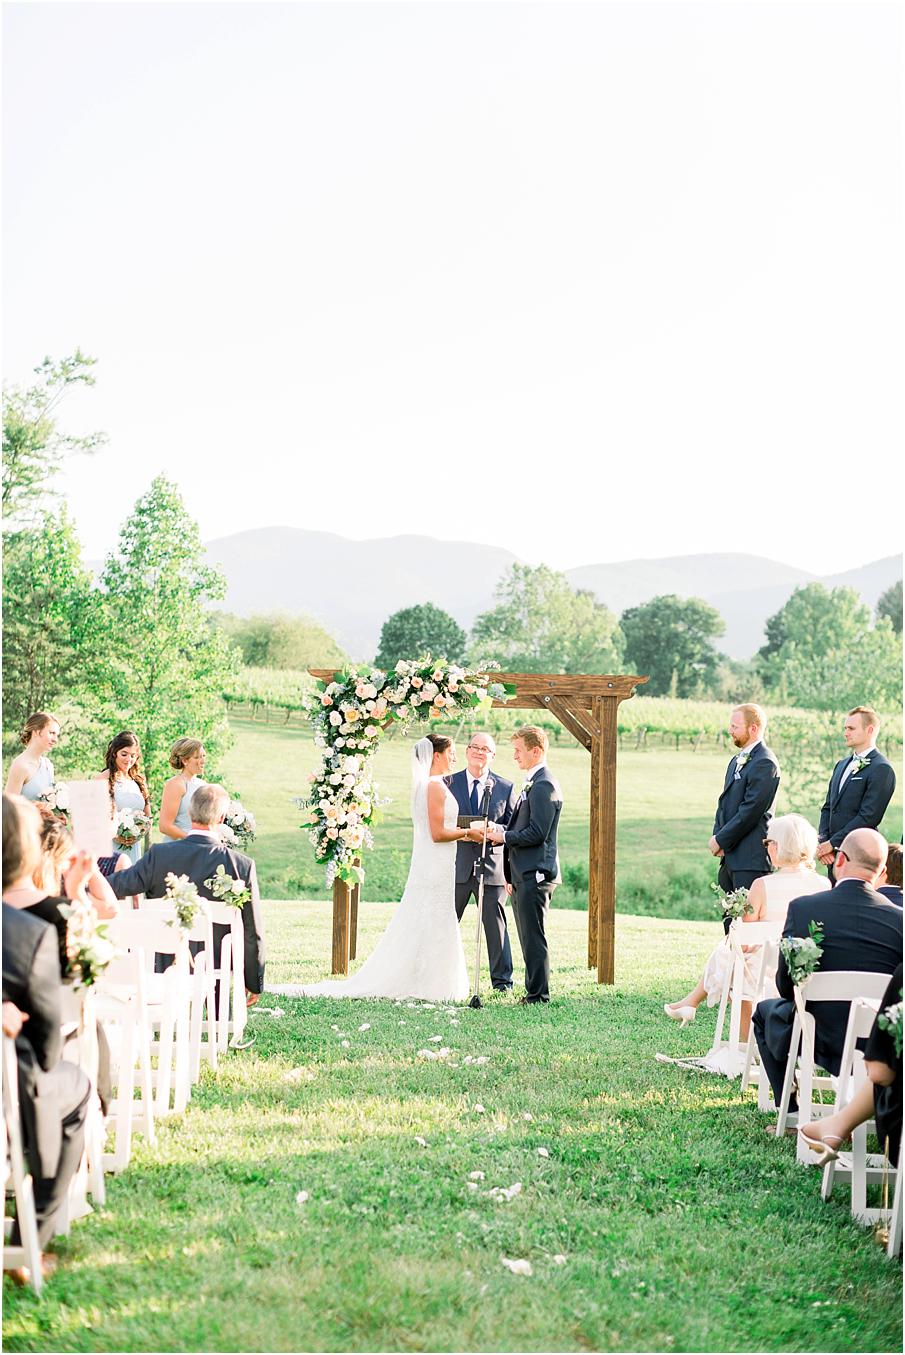 A stunning sunset wedding ceremony with mountains in the backdrop at Veritas Winery